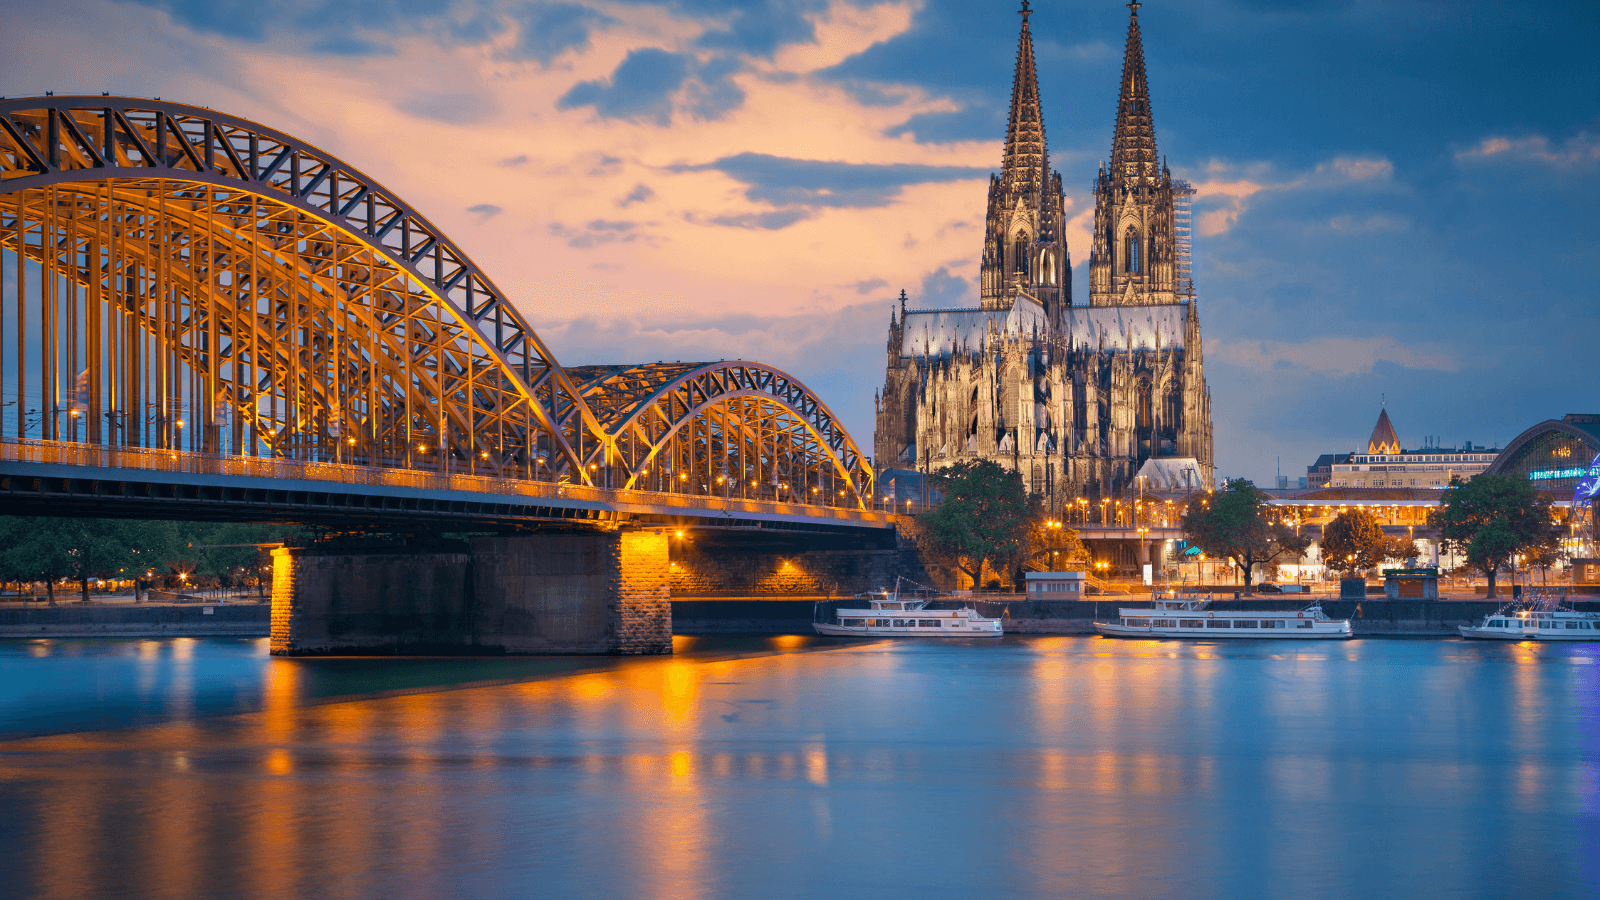 The Cologne Cathedral And Hohenzollern Bridge Across The Rhine River In Germany